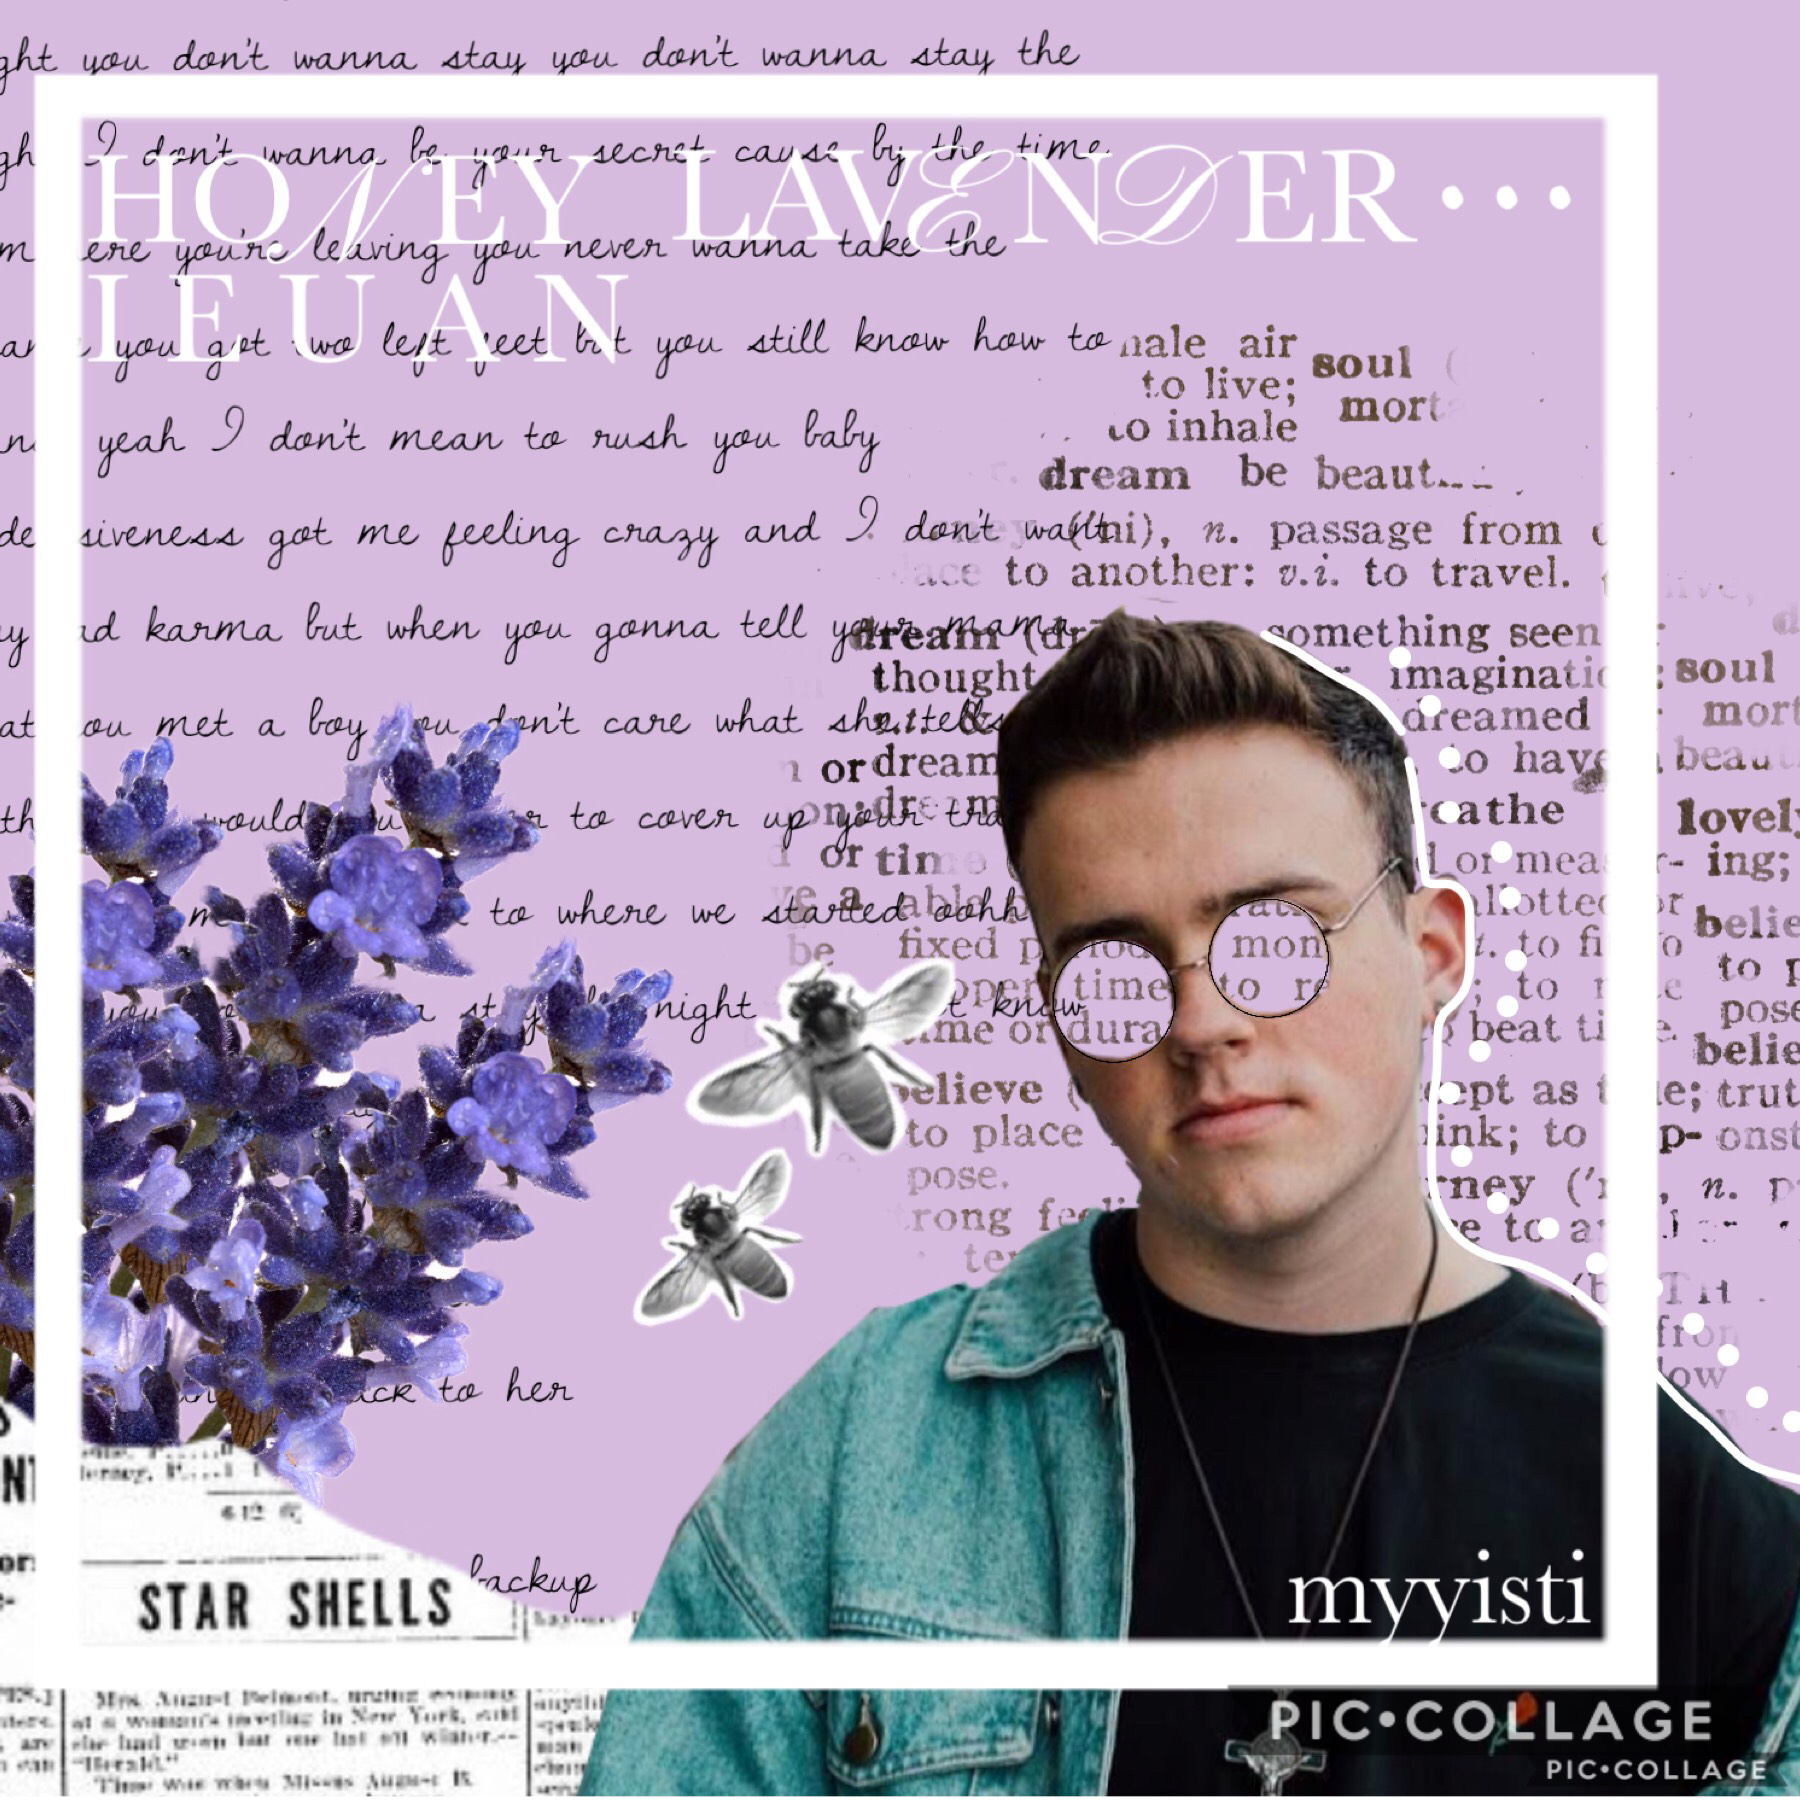 ieuan - honey lavender (tap here)
I just love dis song sooo mucchhhh! but I didn’t rlly try in dis collage :/